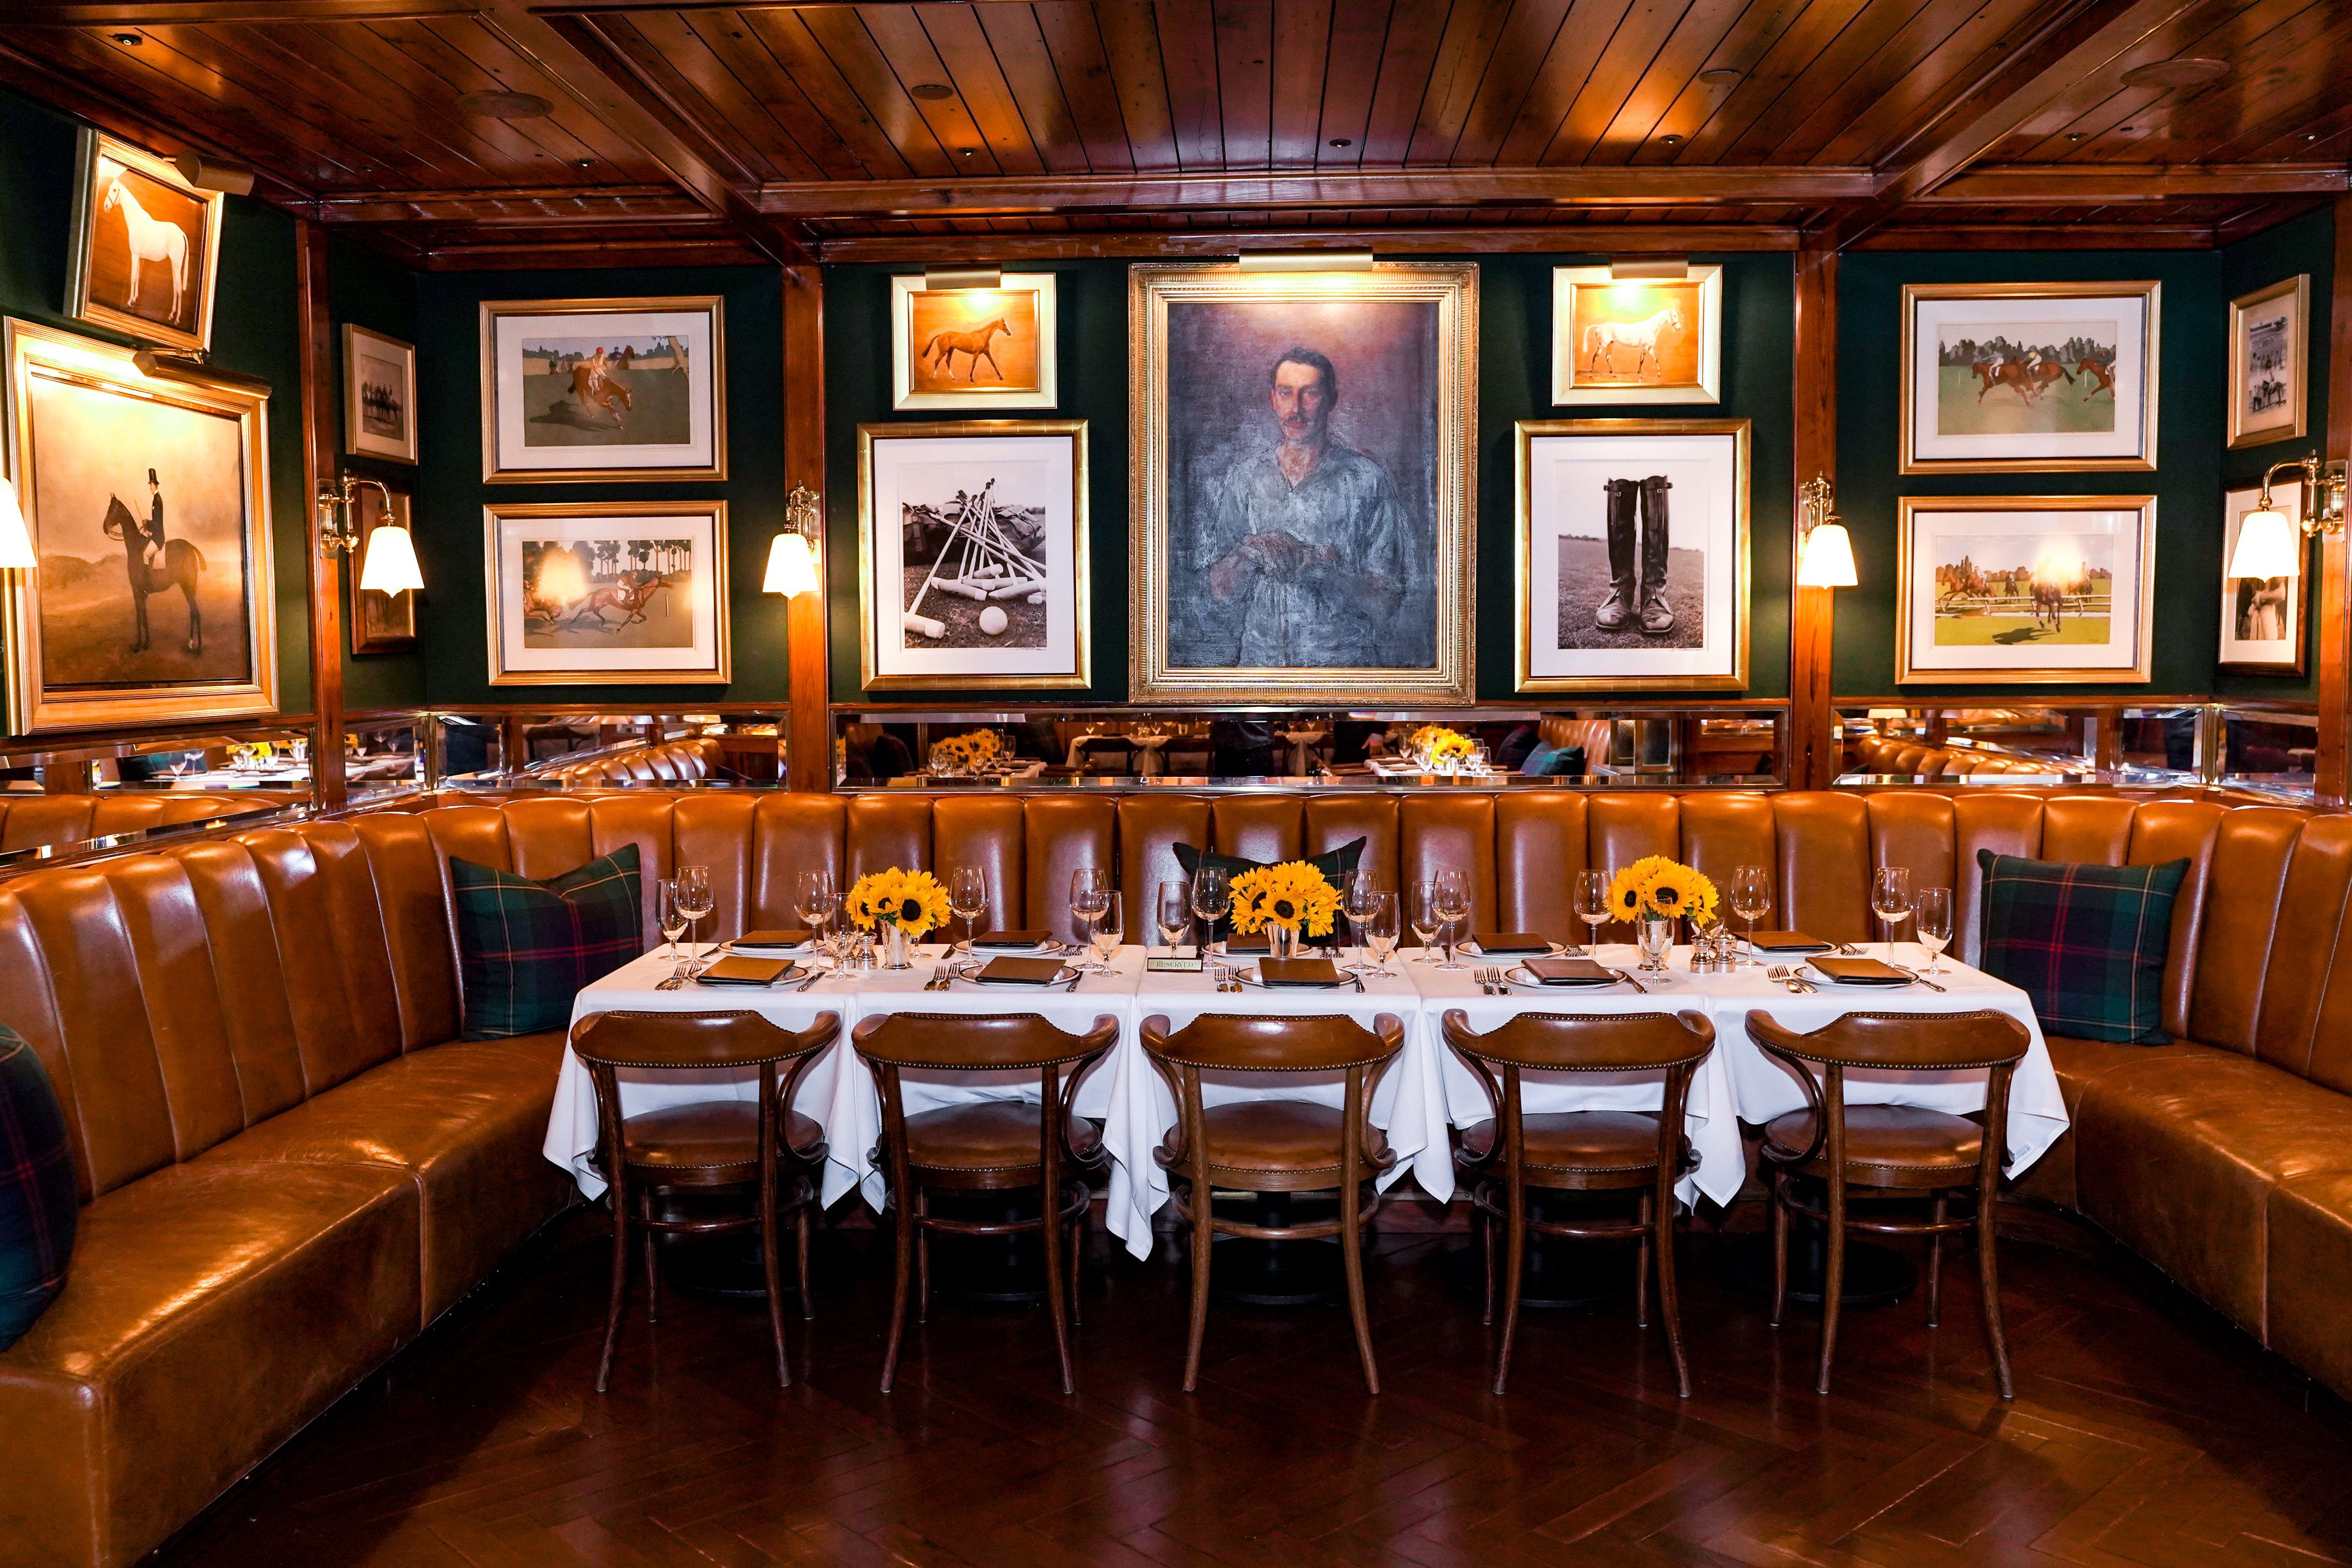 A Ralph Lauren Restaurant, the Polo Bar, Comes to New York - The New York  Times